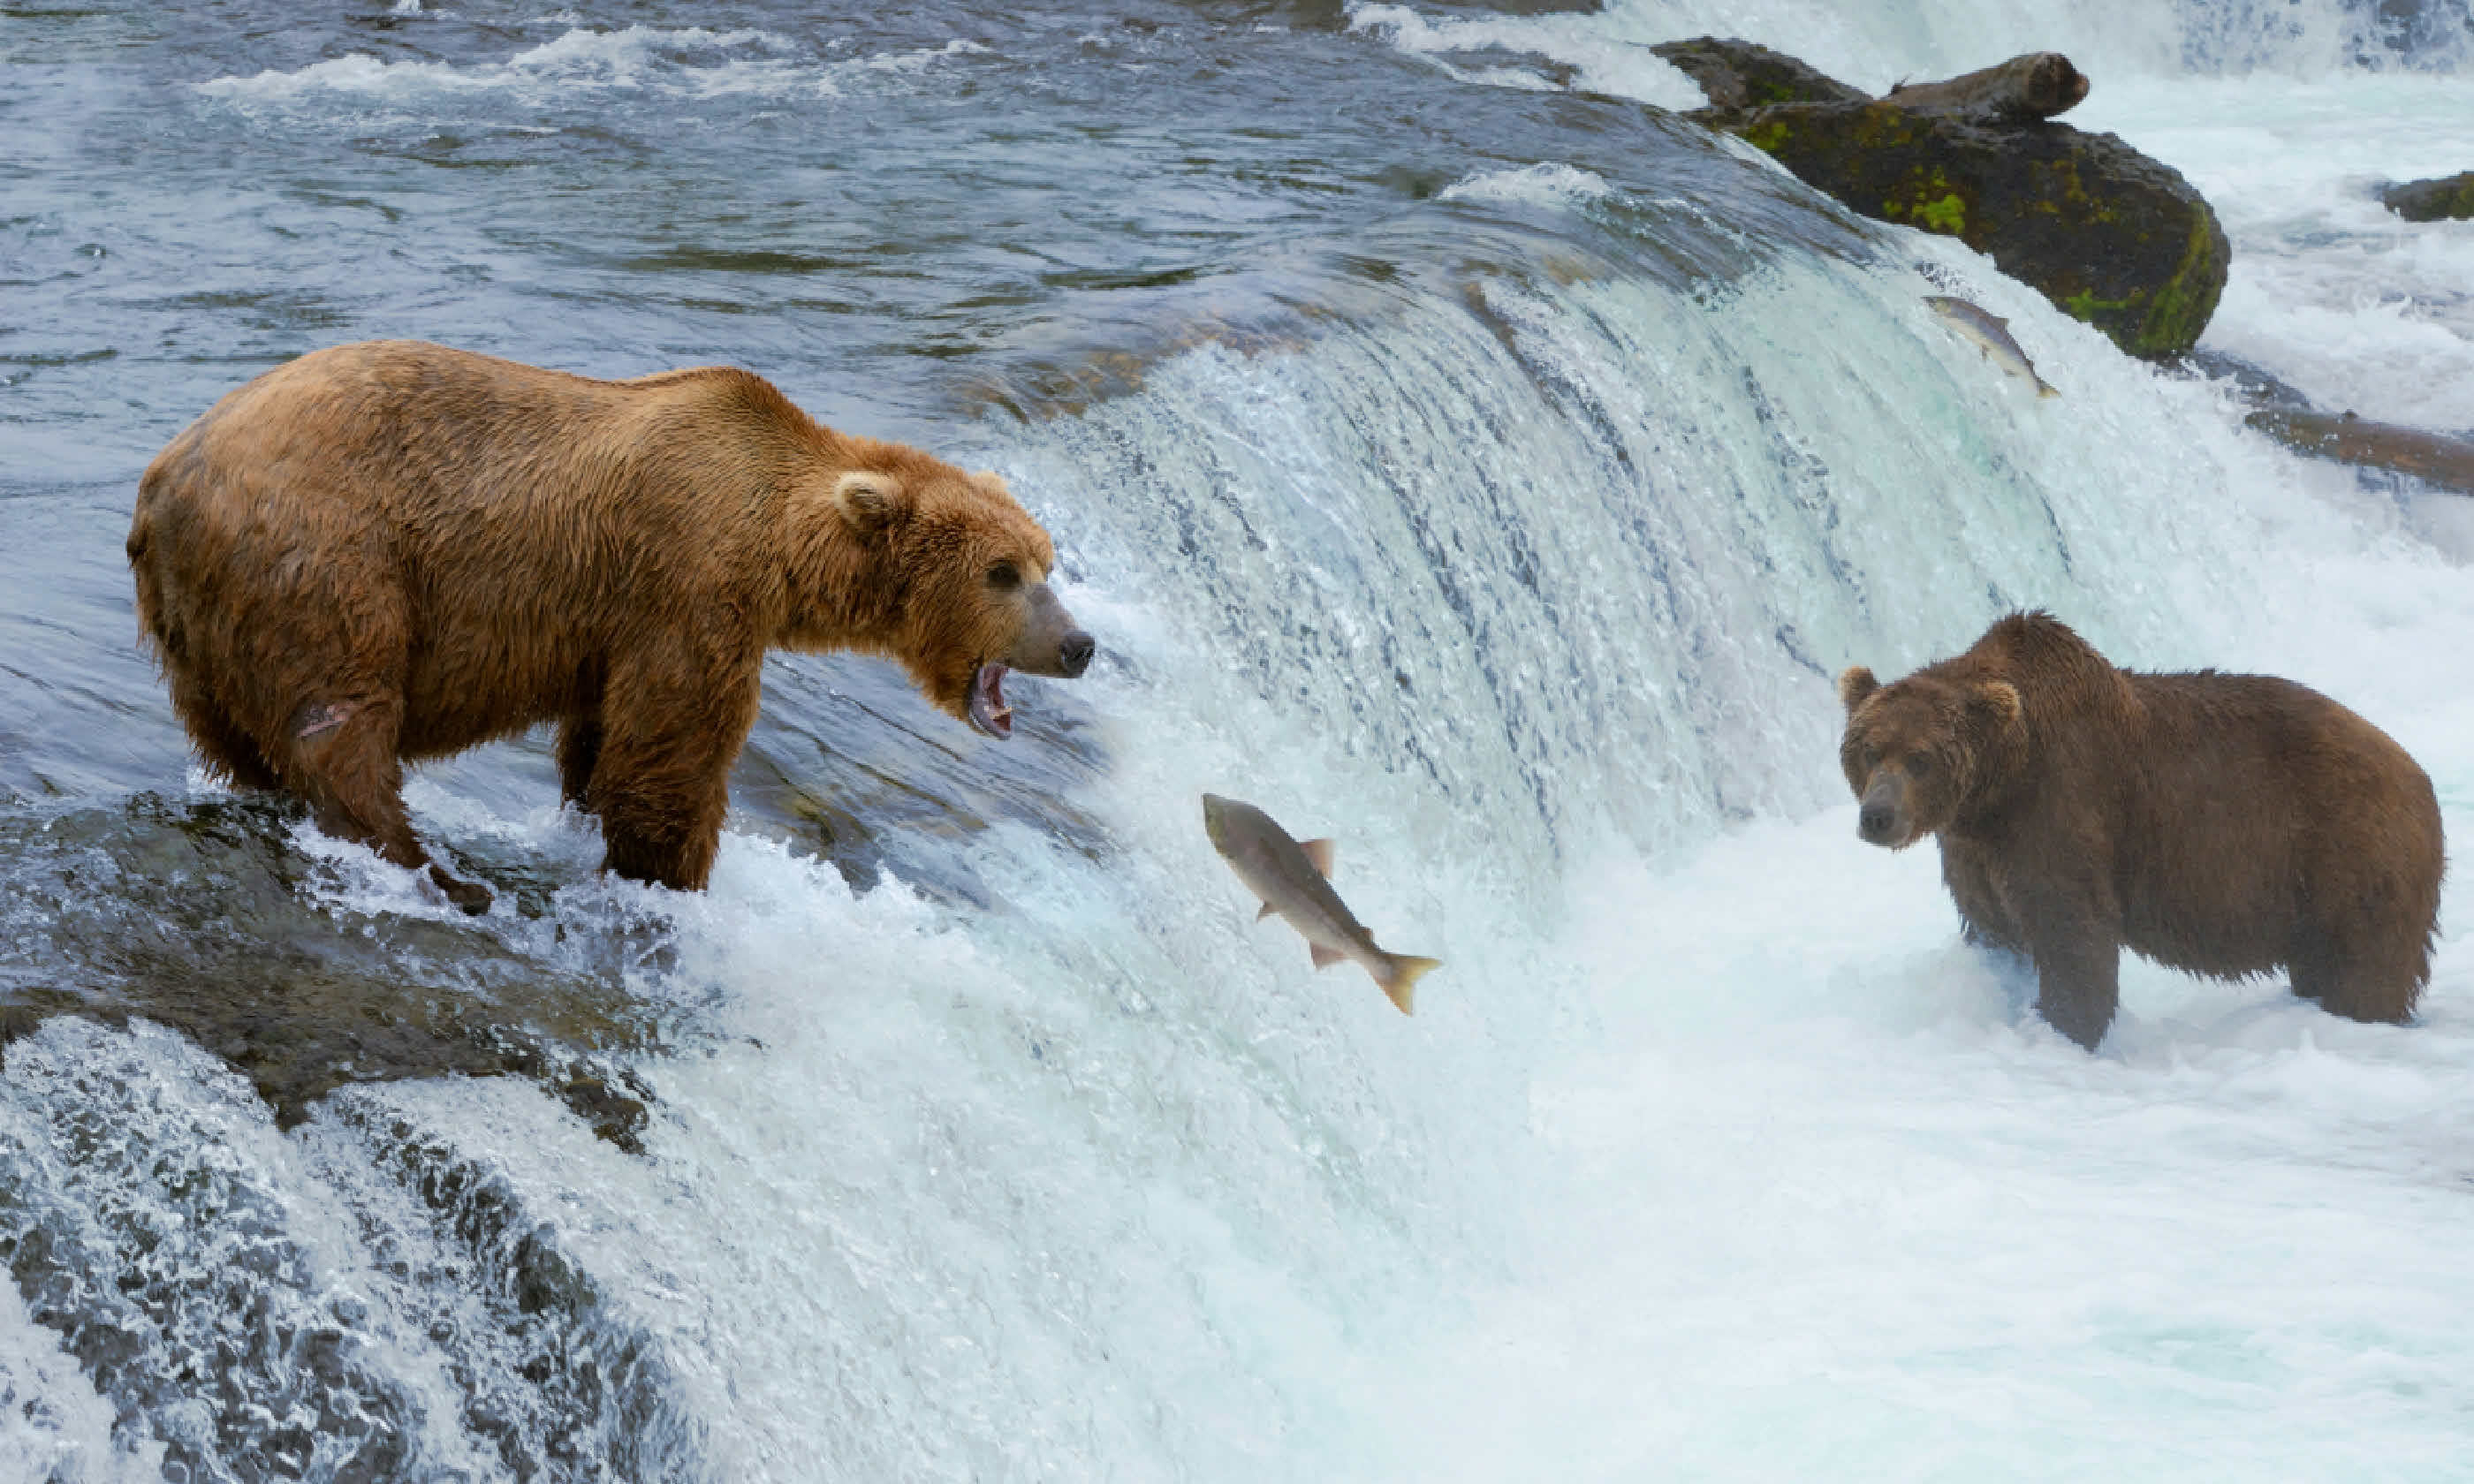 A grizzly bear hunting salmon at Brooks falls (Shutterstock)